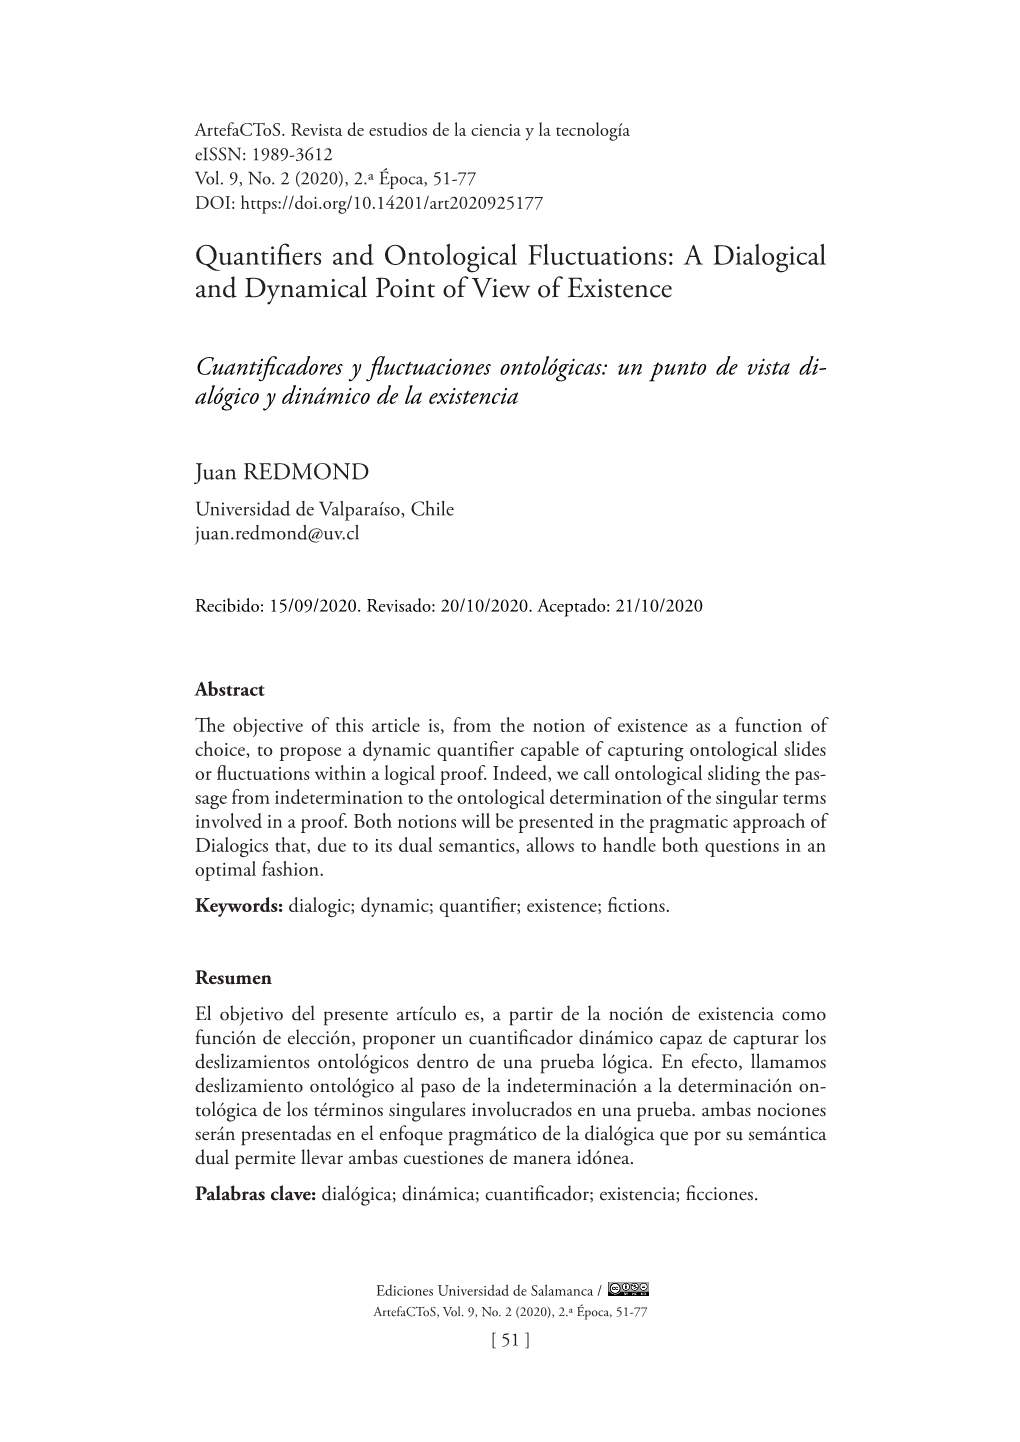 Quantifiers and Ontological Fluctuations